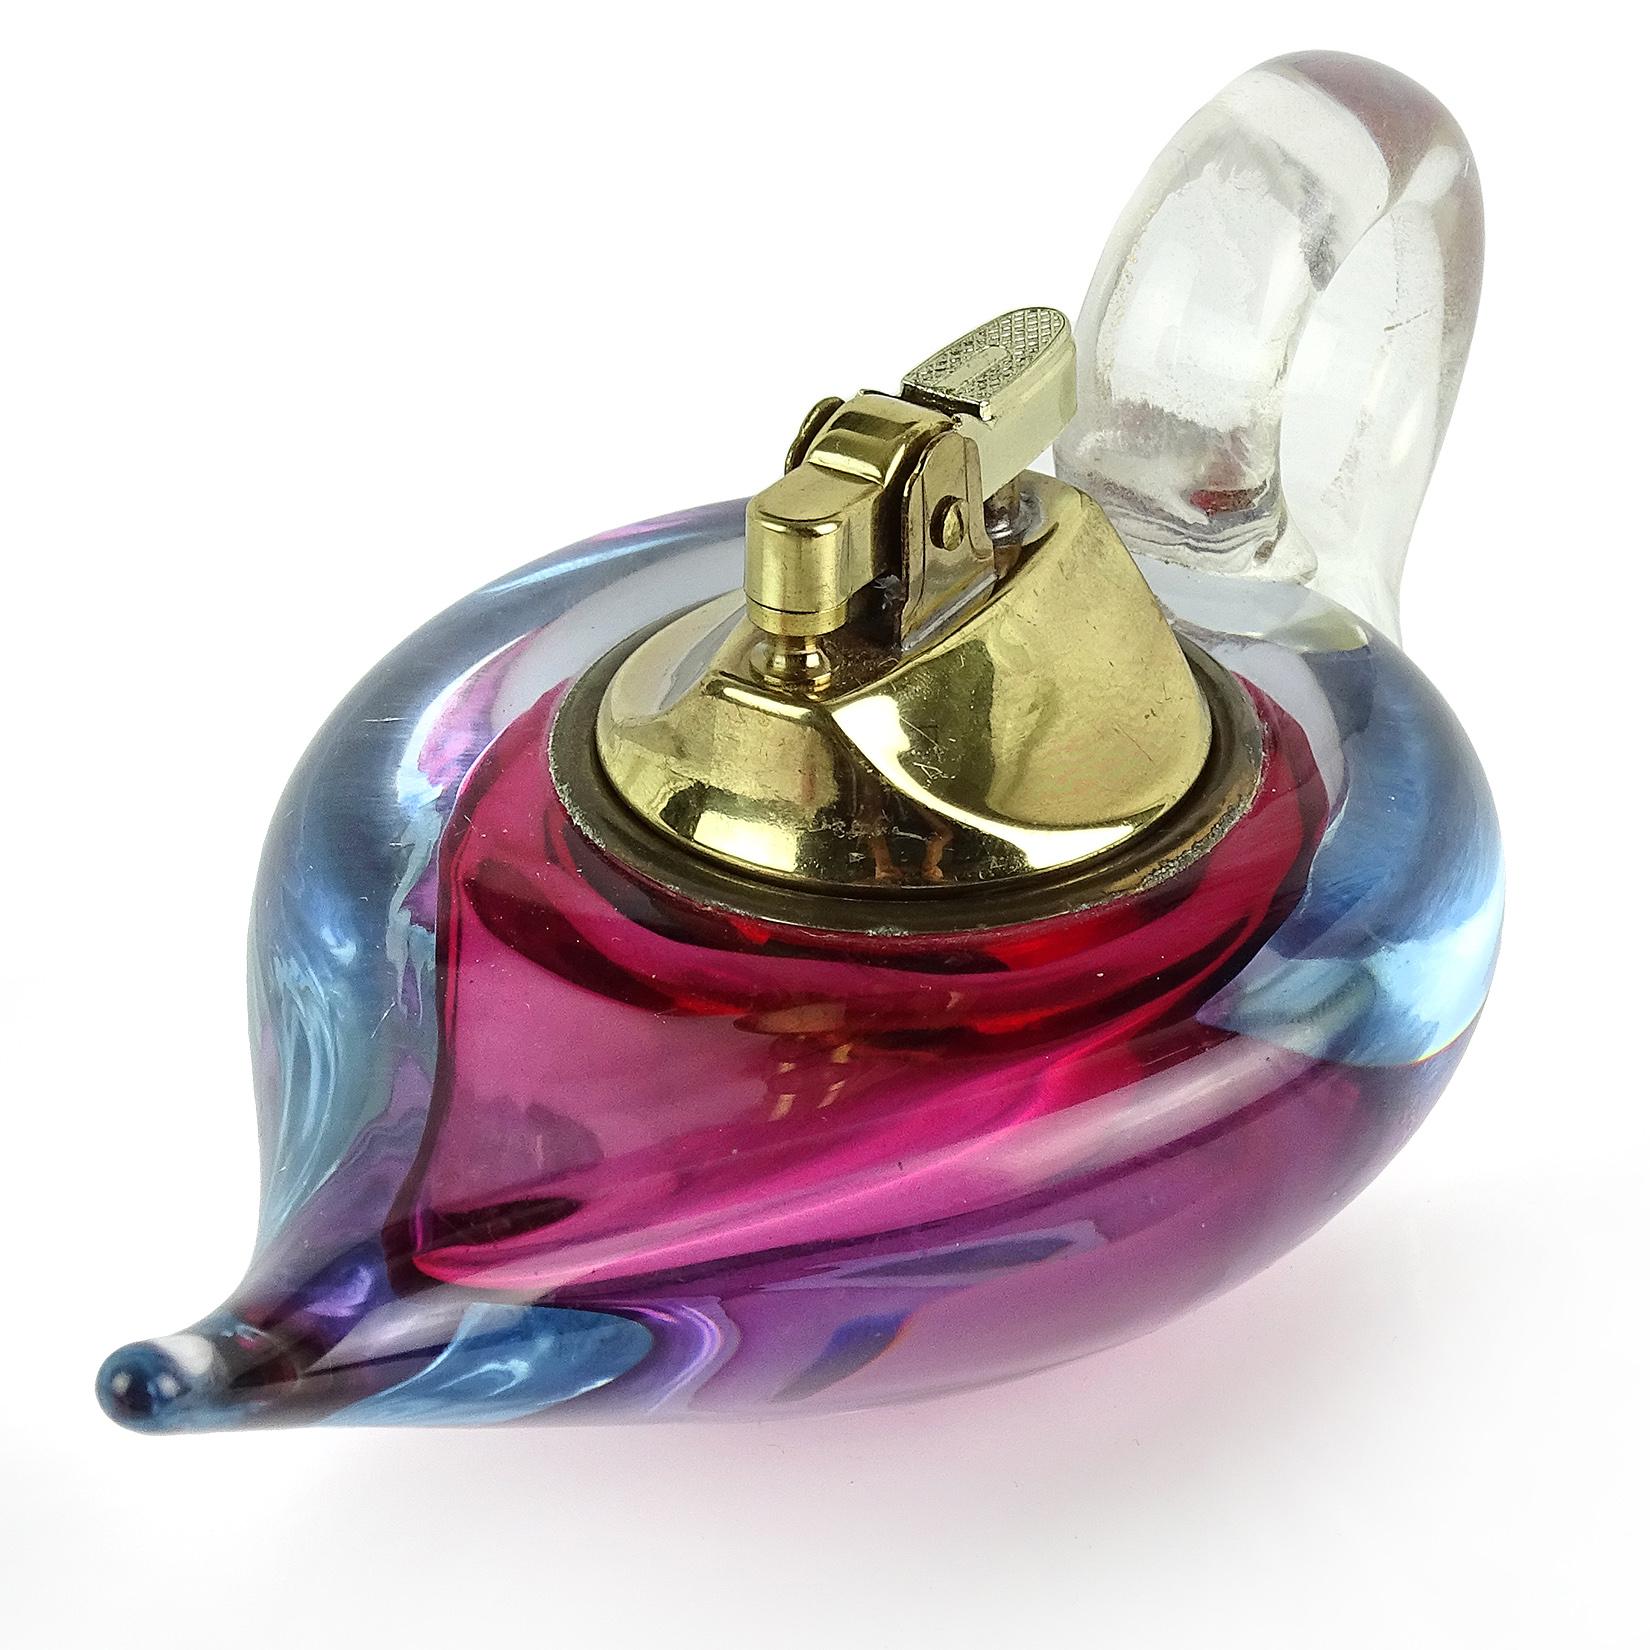 Beautiful vintage Murano hand blown Sommerso purple, blue and gold flecks Italian art glass Aladdin lamp lighter. Documented to designer Alfredo Barbini. Very unusual shape. The lighter mechanism sparks, with new wick. Selling as a decorative piece,